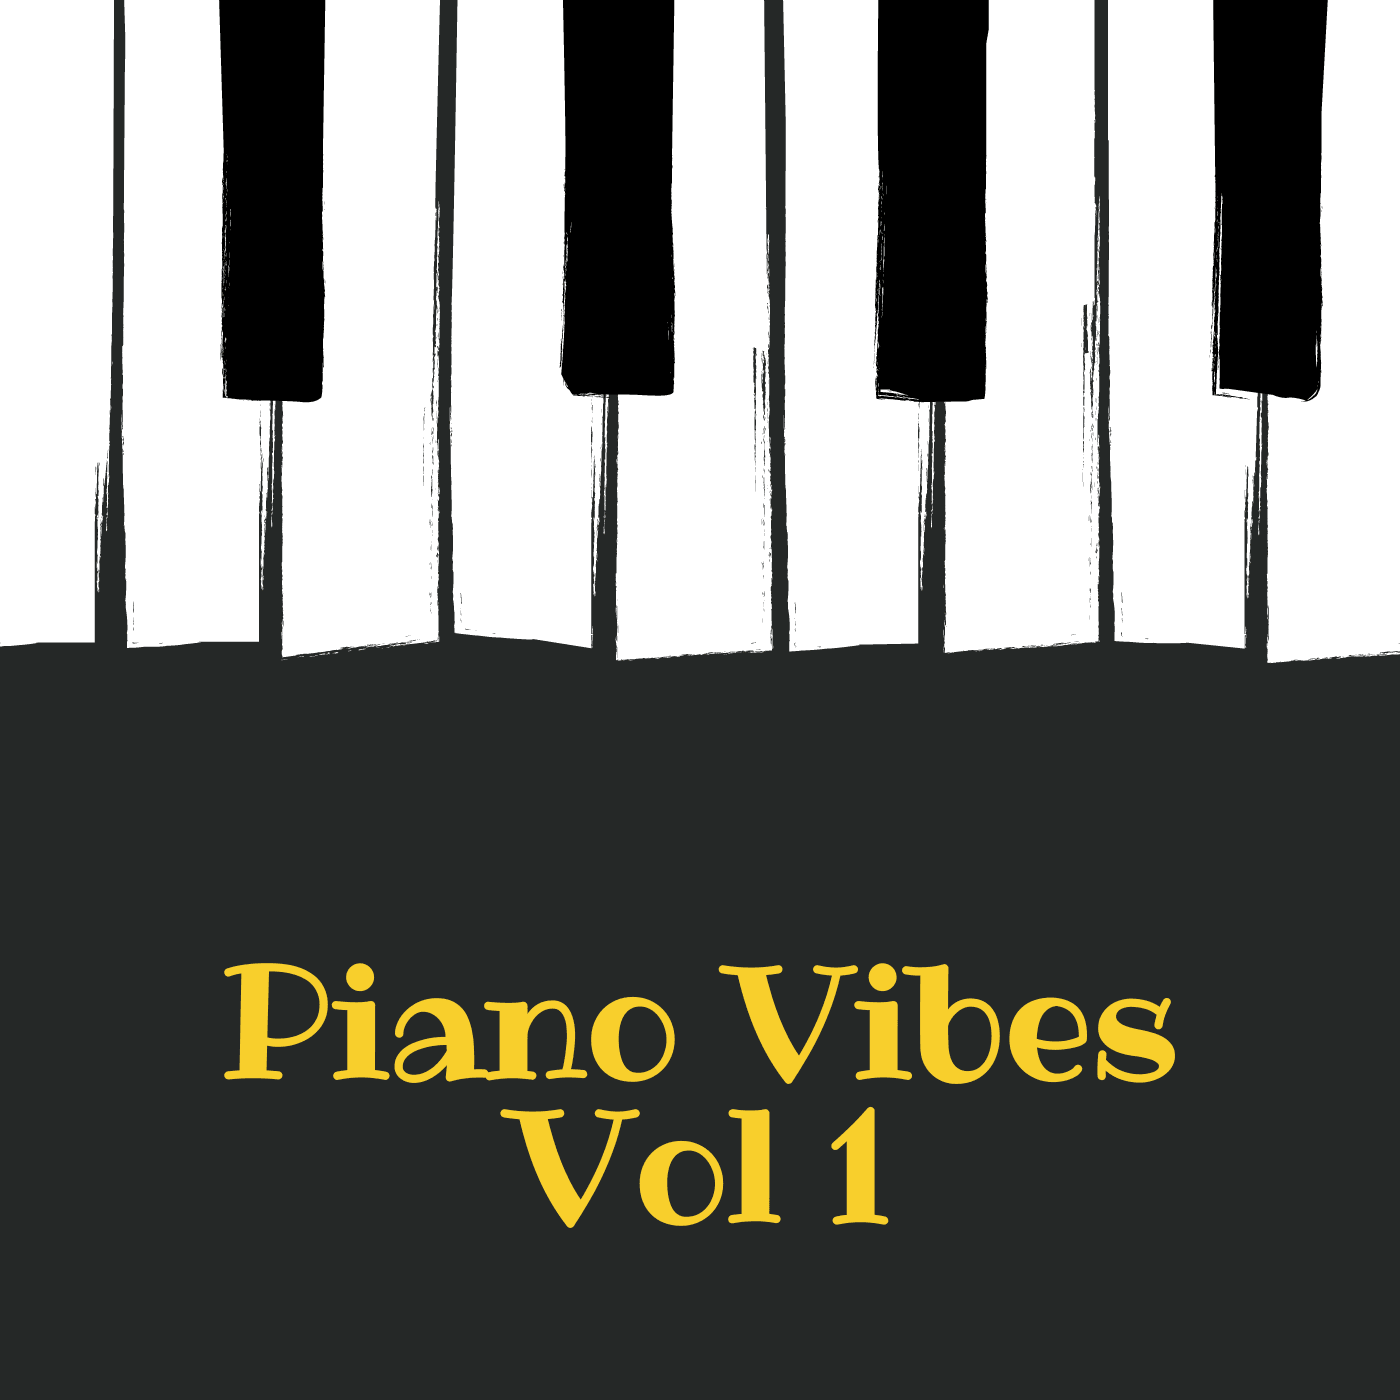 Piano Vibes Vol 1 Acoustic Backs And Tracks 